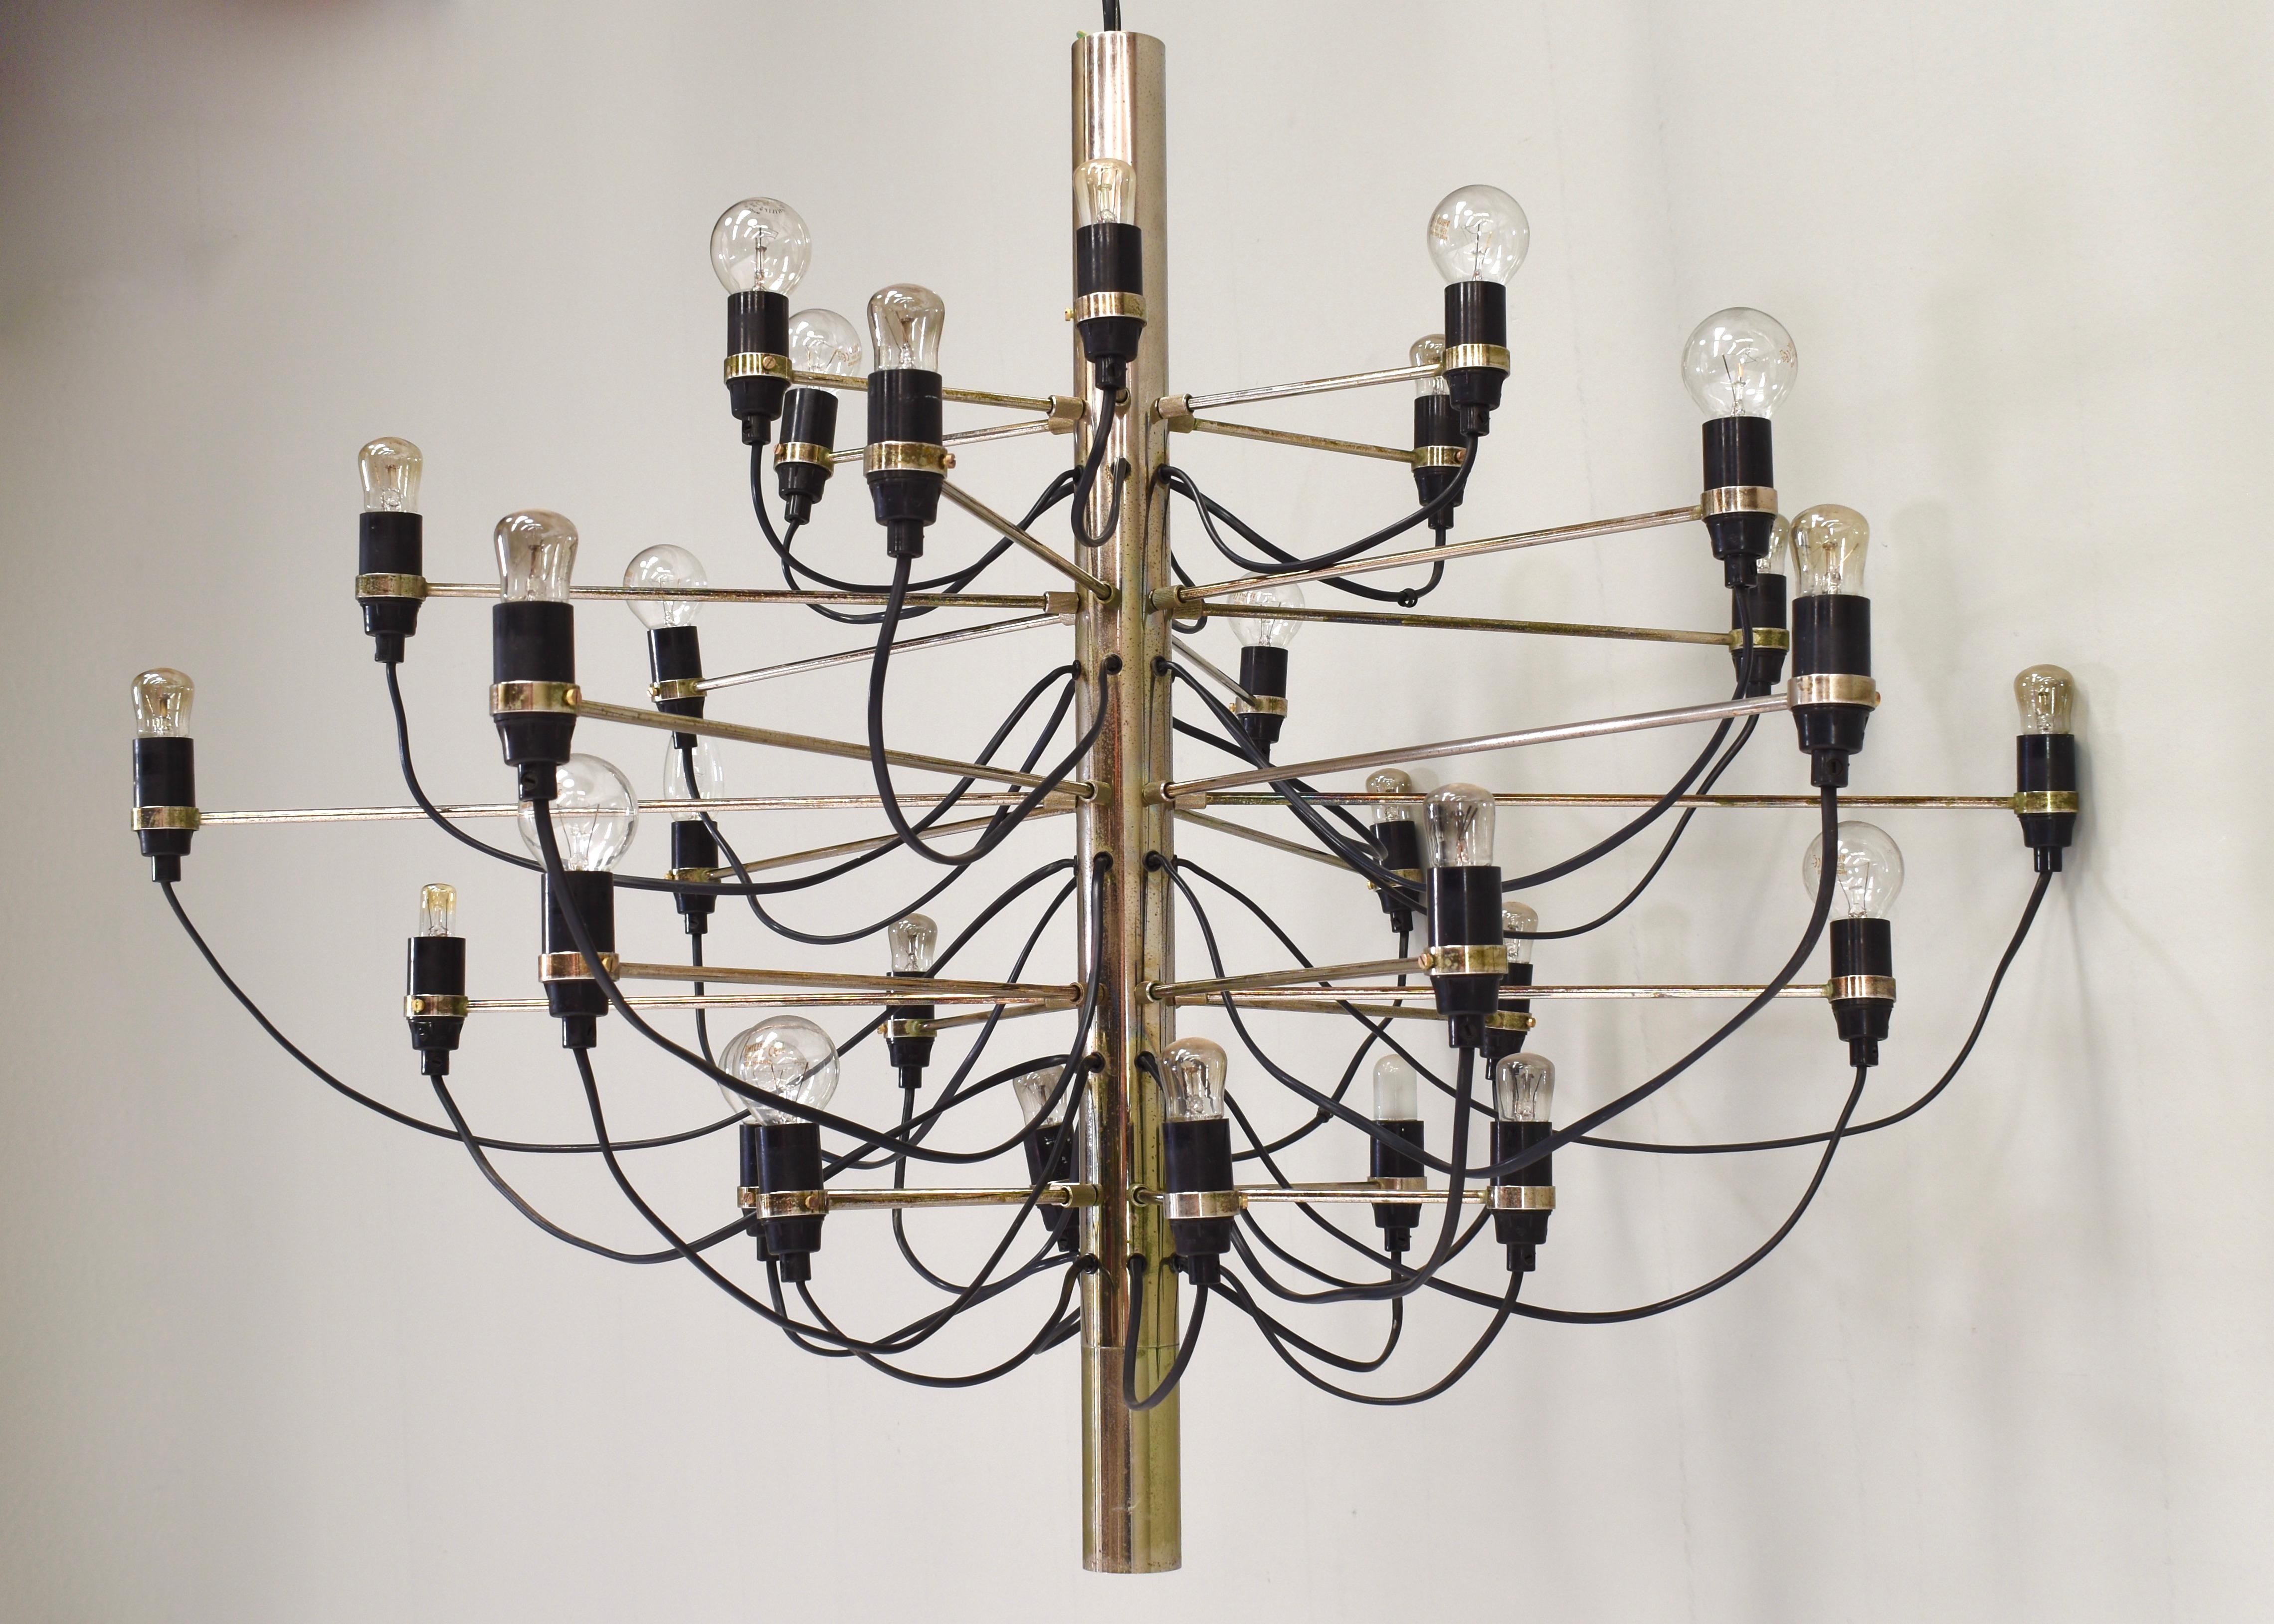 Vintage early edition 2097/30 chandelier, designed by Gino Sarfatti. This lamp is a rare brassed (gold coloured) edition, although the brass has faded much due to it's age and it shows some patina in the manor of flash rust. Brassed early editions